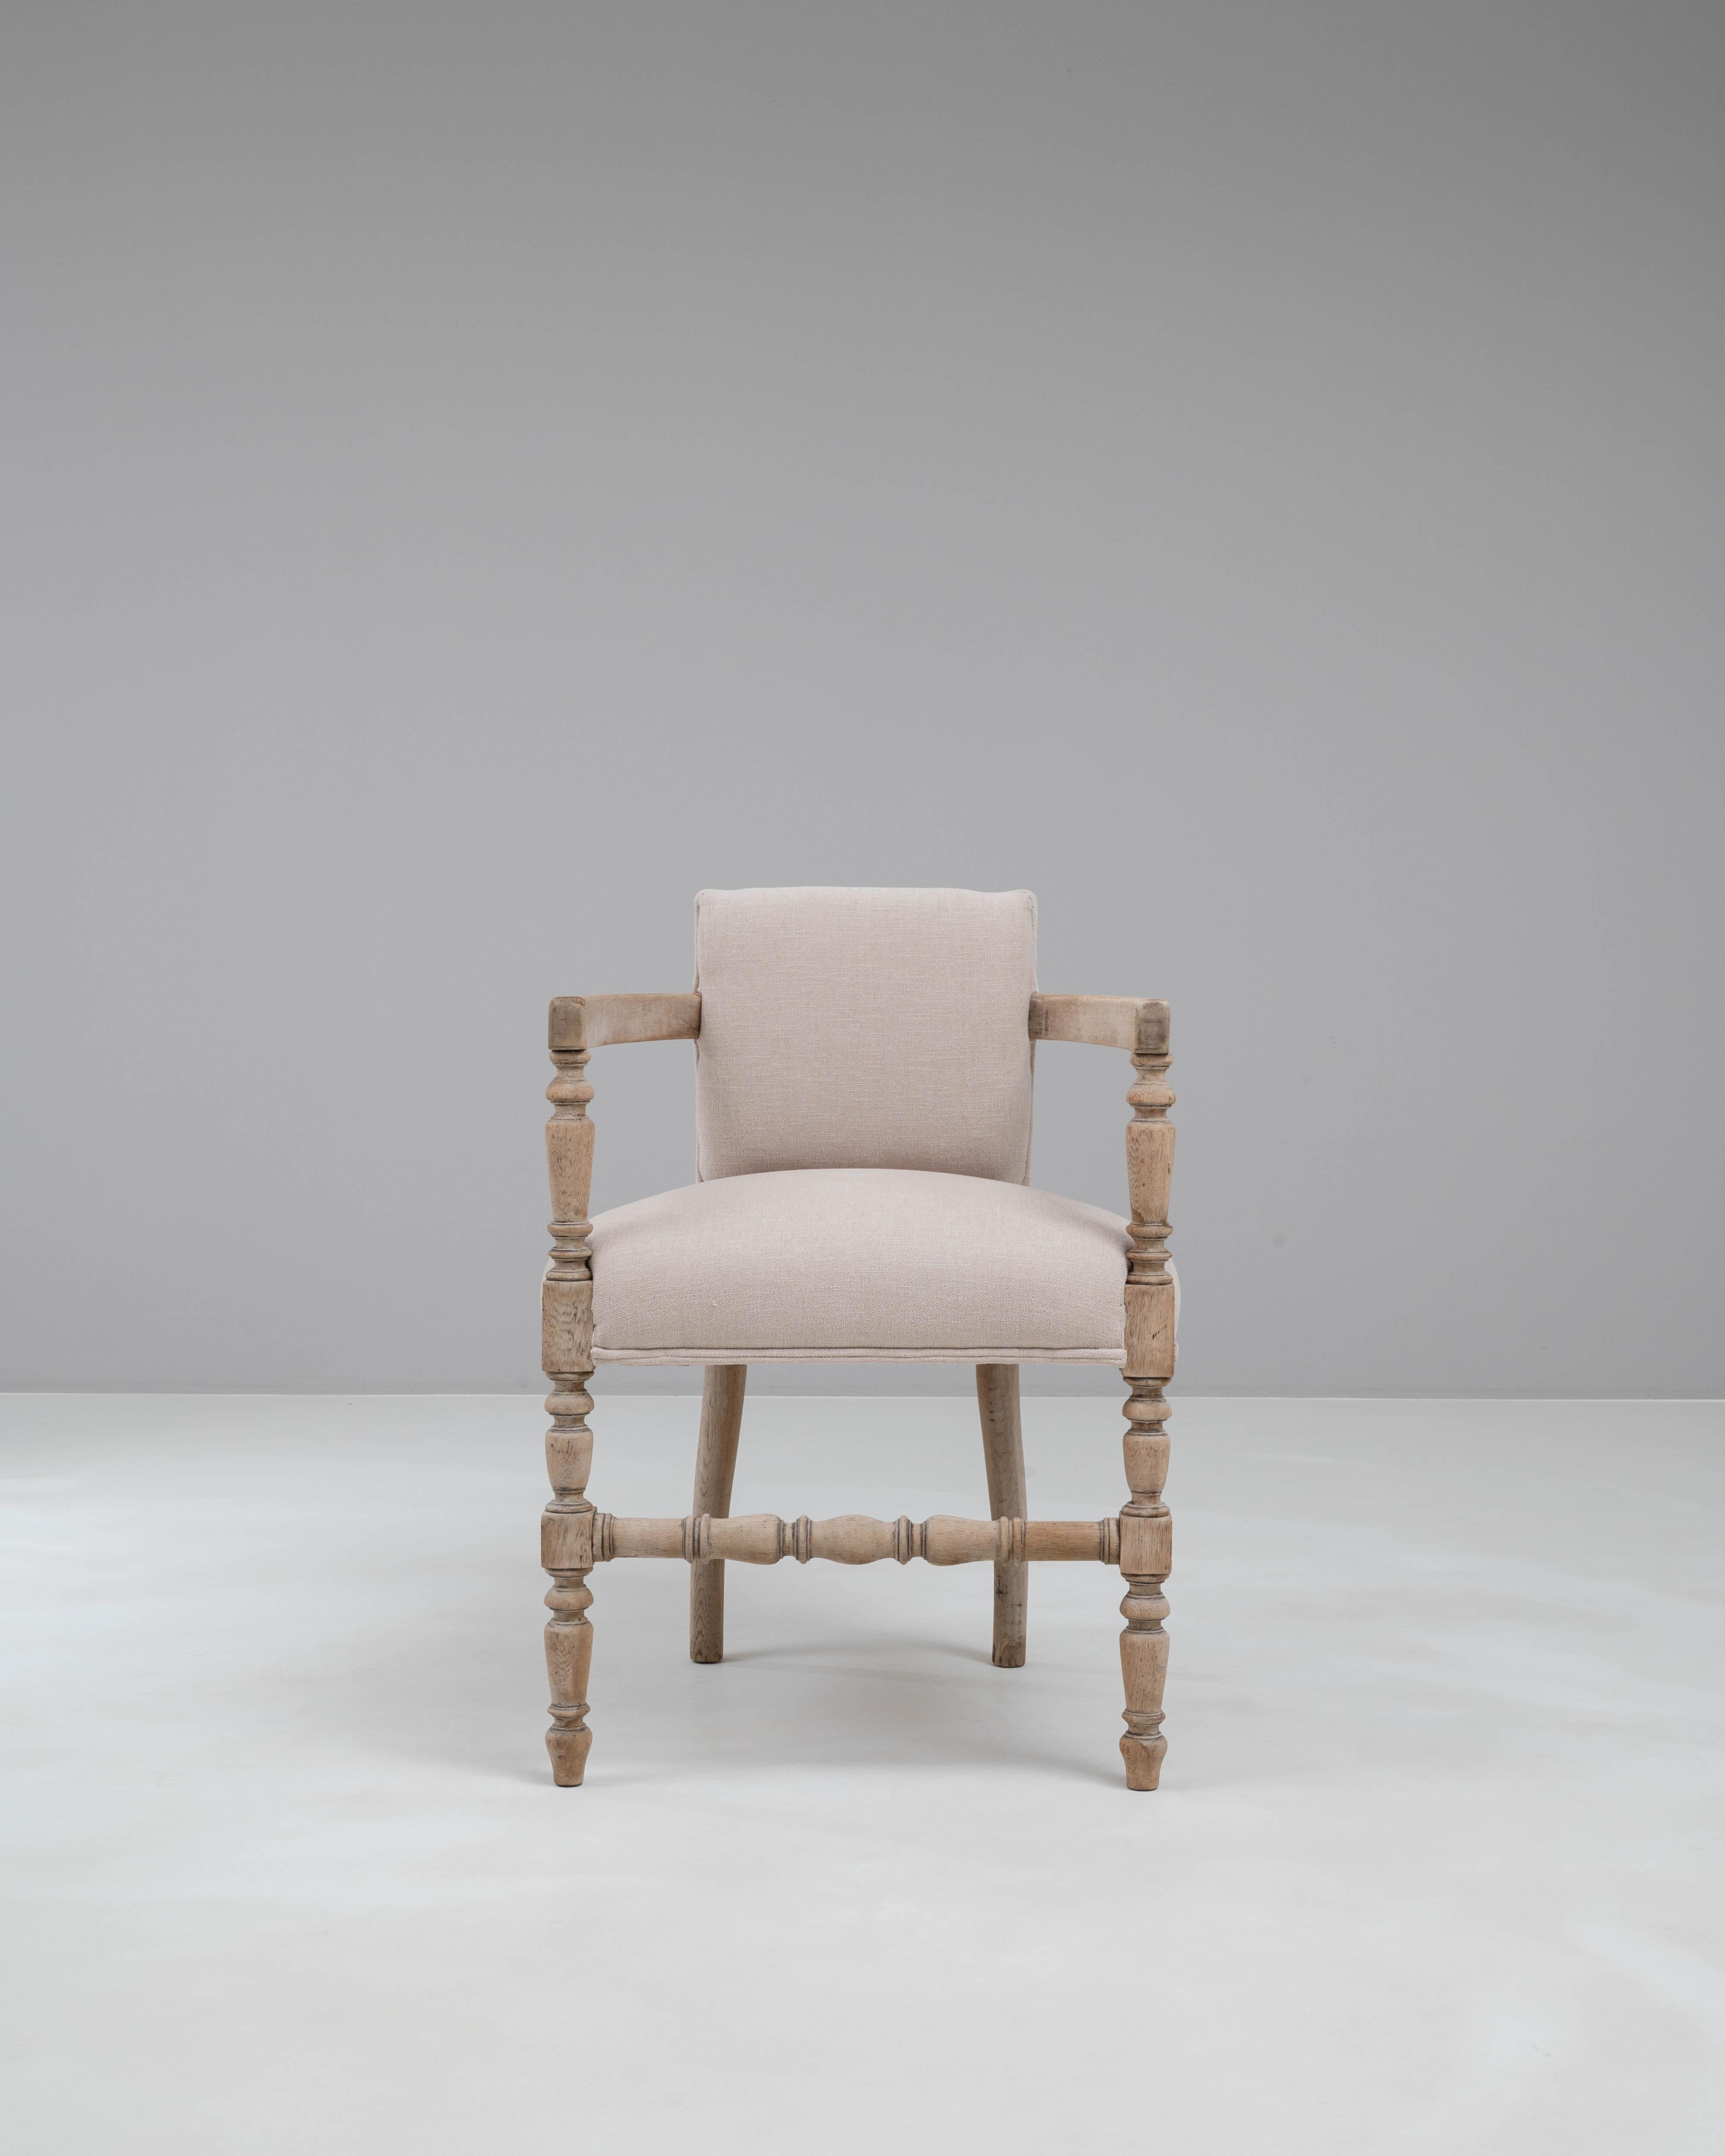 Elevate your space with the timeless elegance of this 20th Century French Bleached Oak Armchair. Crafted with meticulous attention to detail, this chair features a sturdy bleached oak frame with beautifully turned spindles and legs that exude a